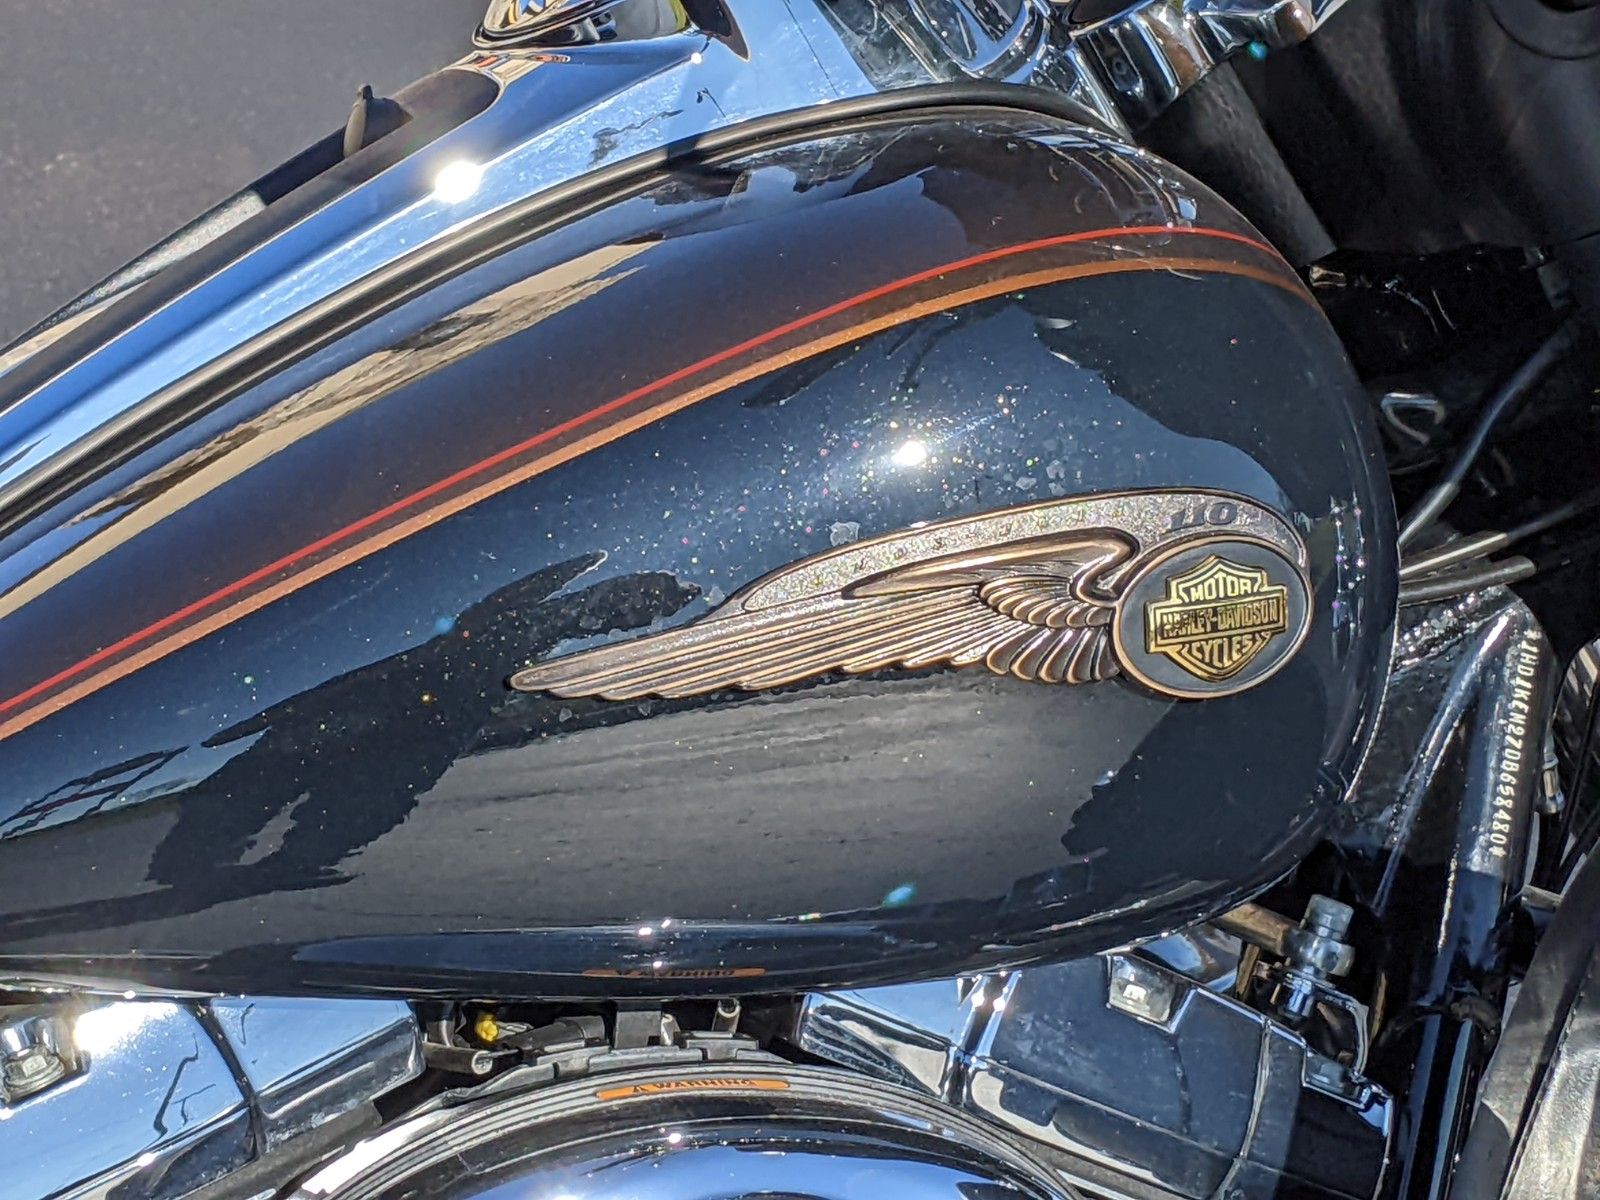 2013 Harley-Davidson Electra Glide® Ultra Limited 110th Anniversary Edition in Muncie, Indiana - Photo 4